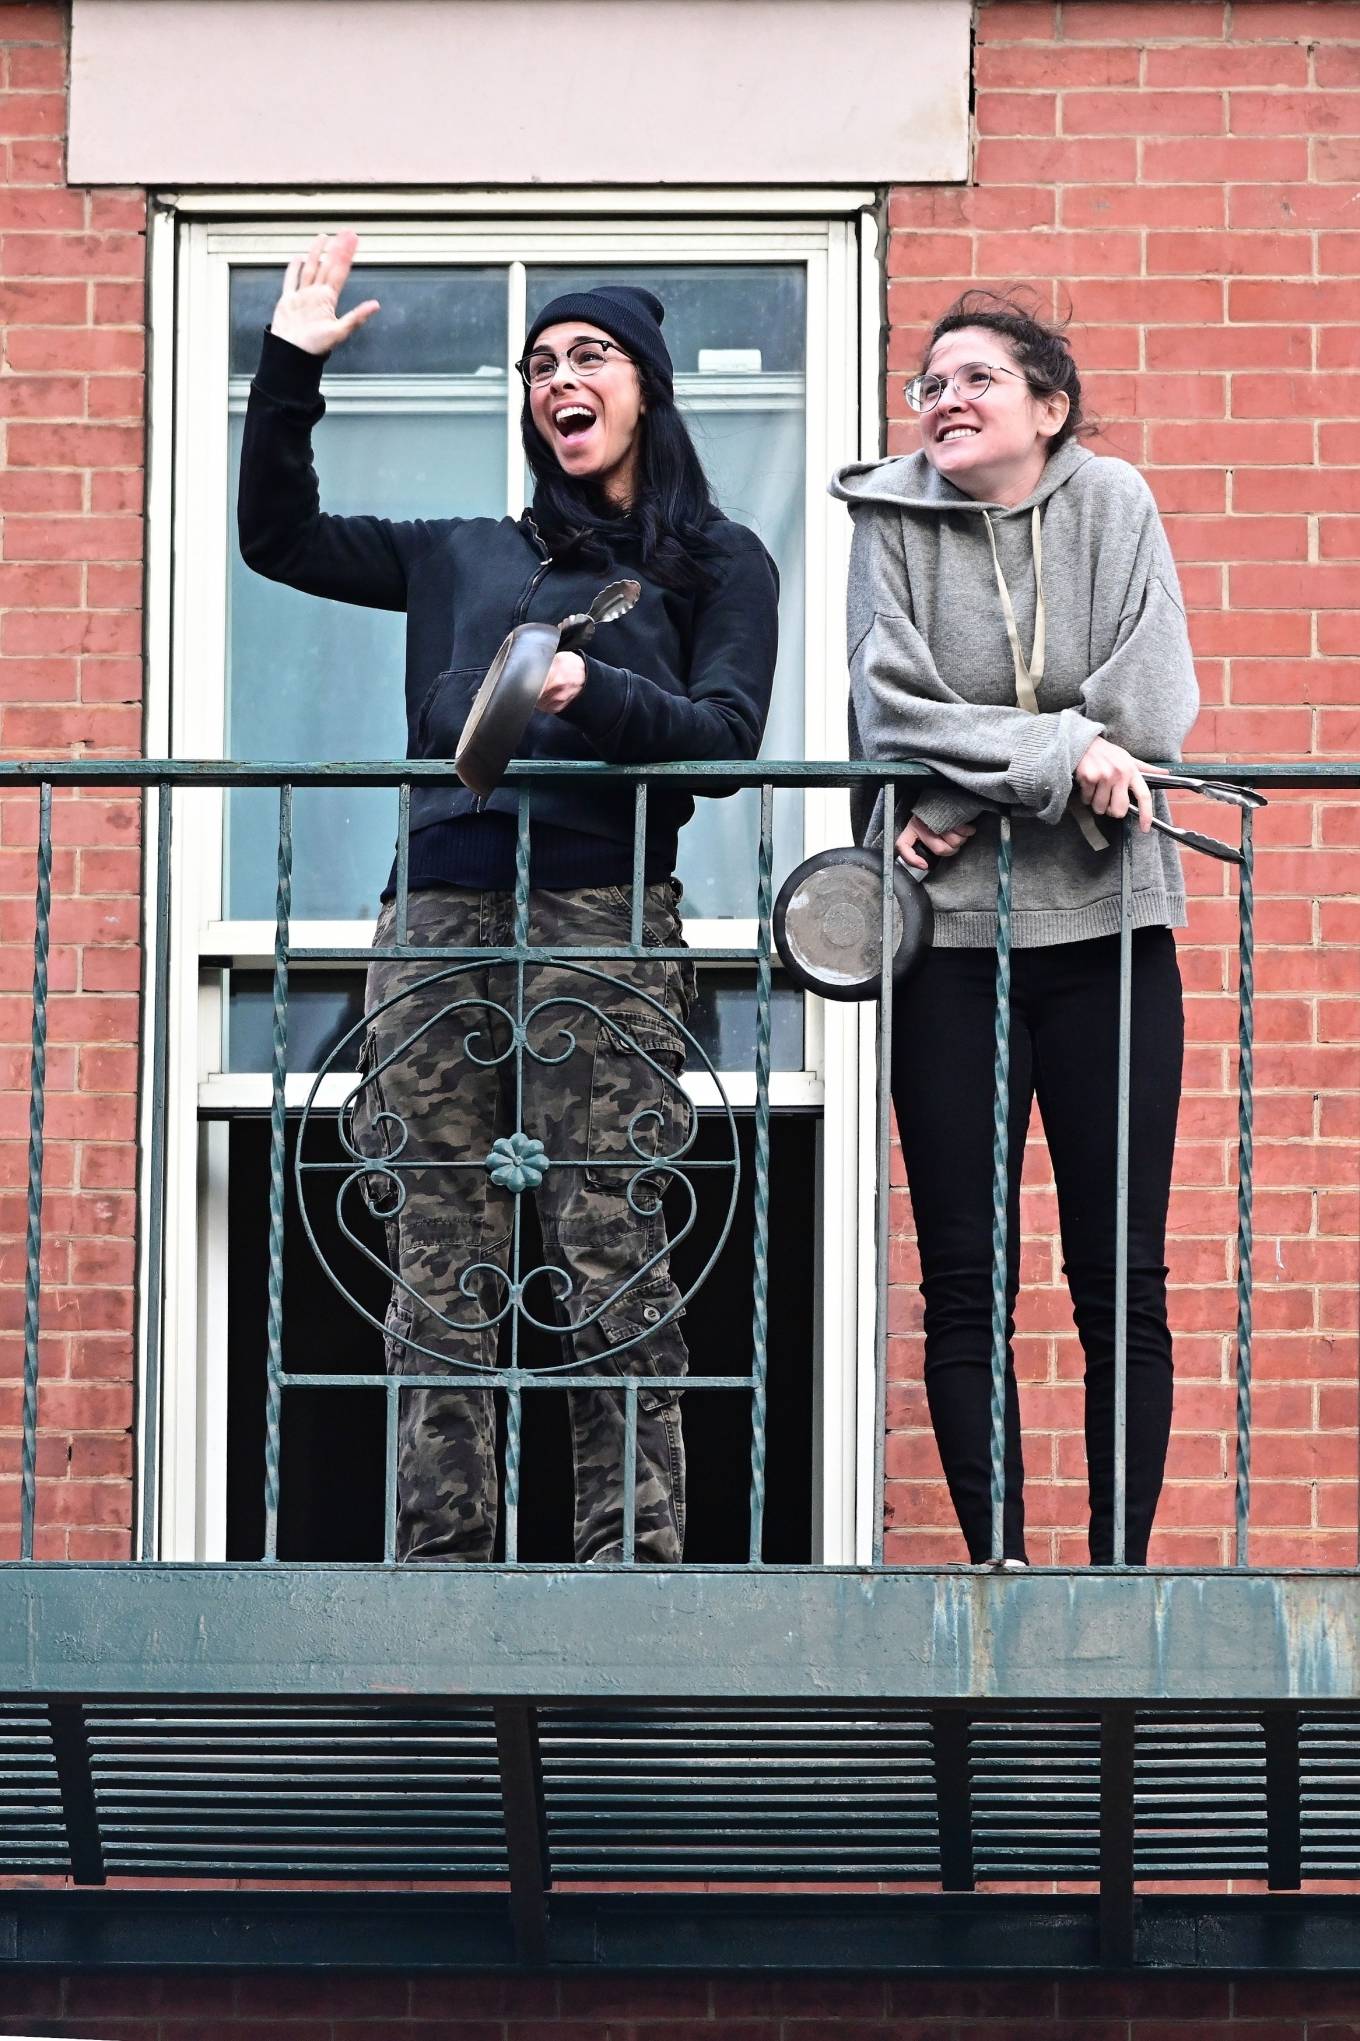 Sarah Silverman â€“ Walking out to her balcony in New York